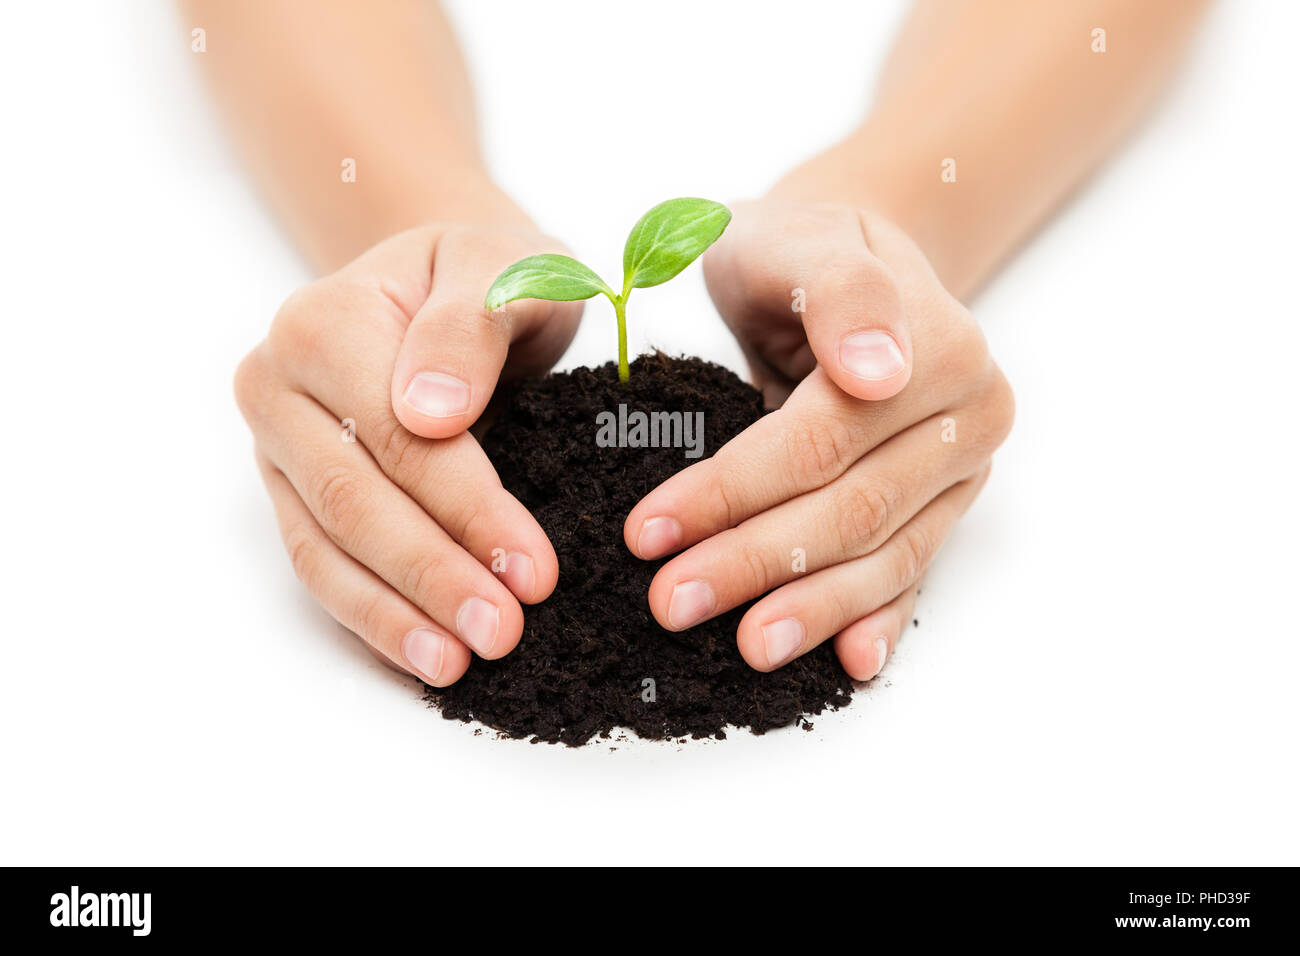 Human hand holding green sprout leaf growth at dirt soil Stock Photo